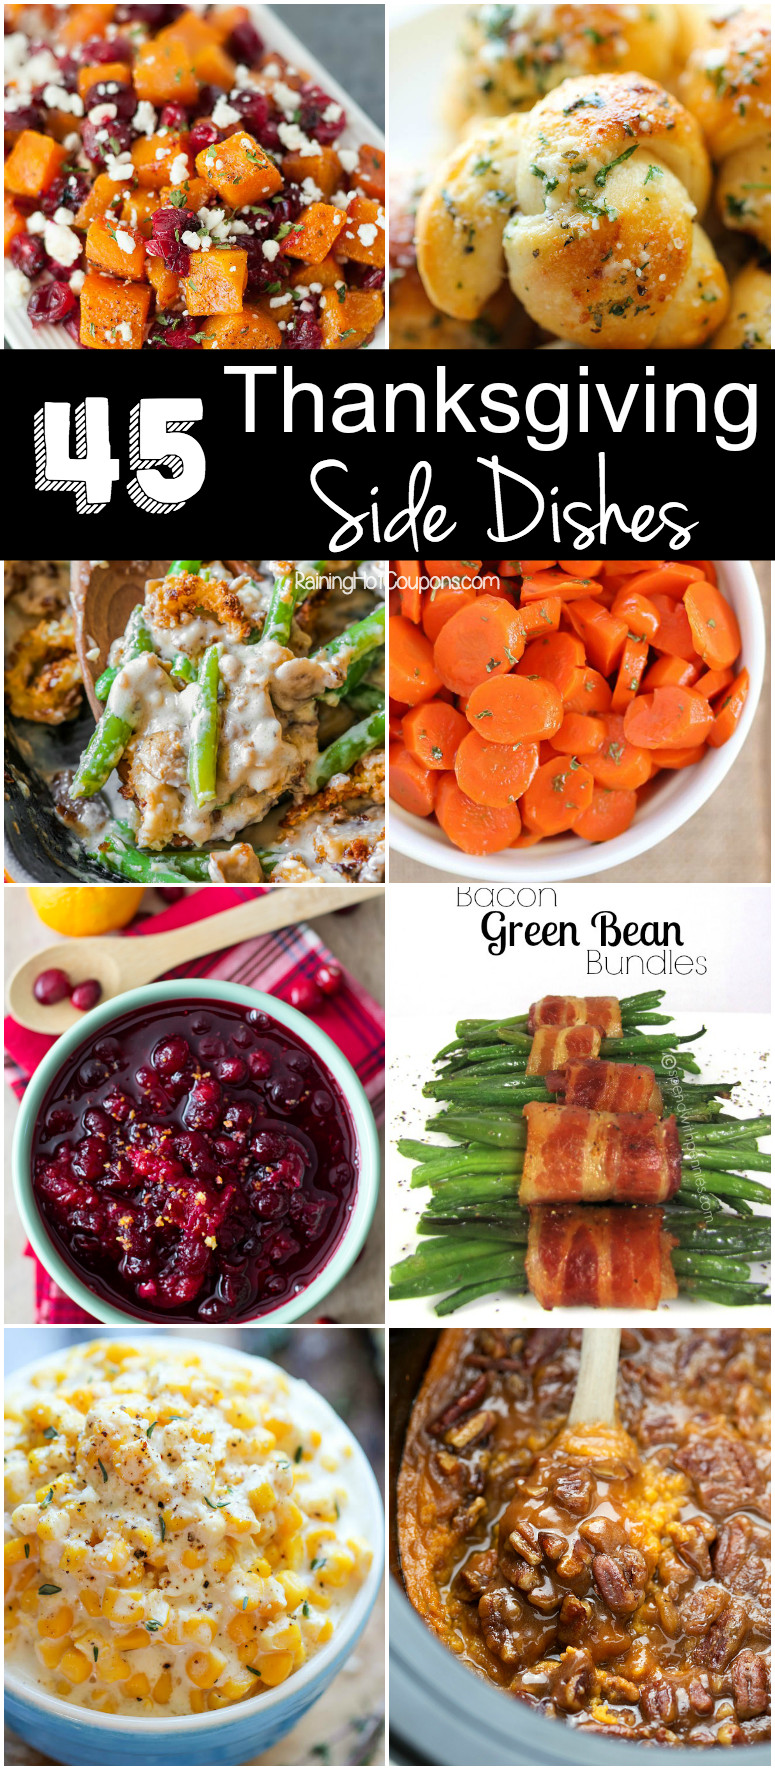 The Best Thanksgiving Side Dishes
 45 Thanksgiving Side Dishes